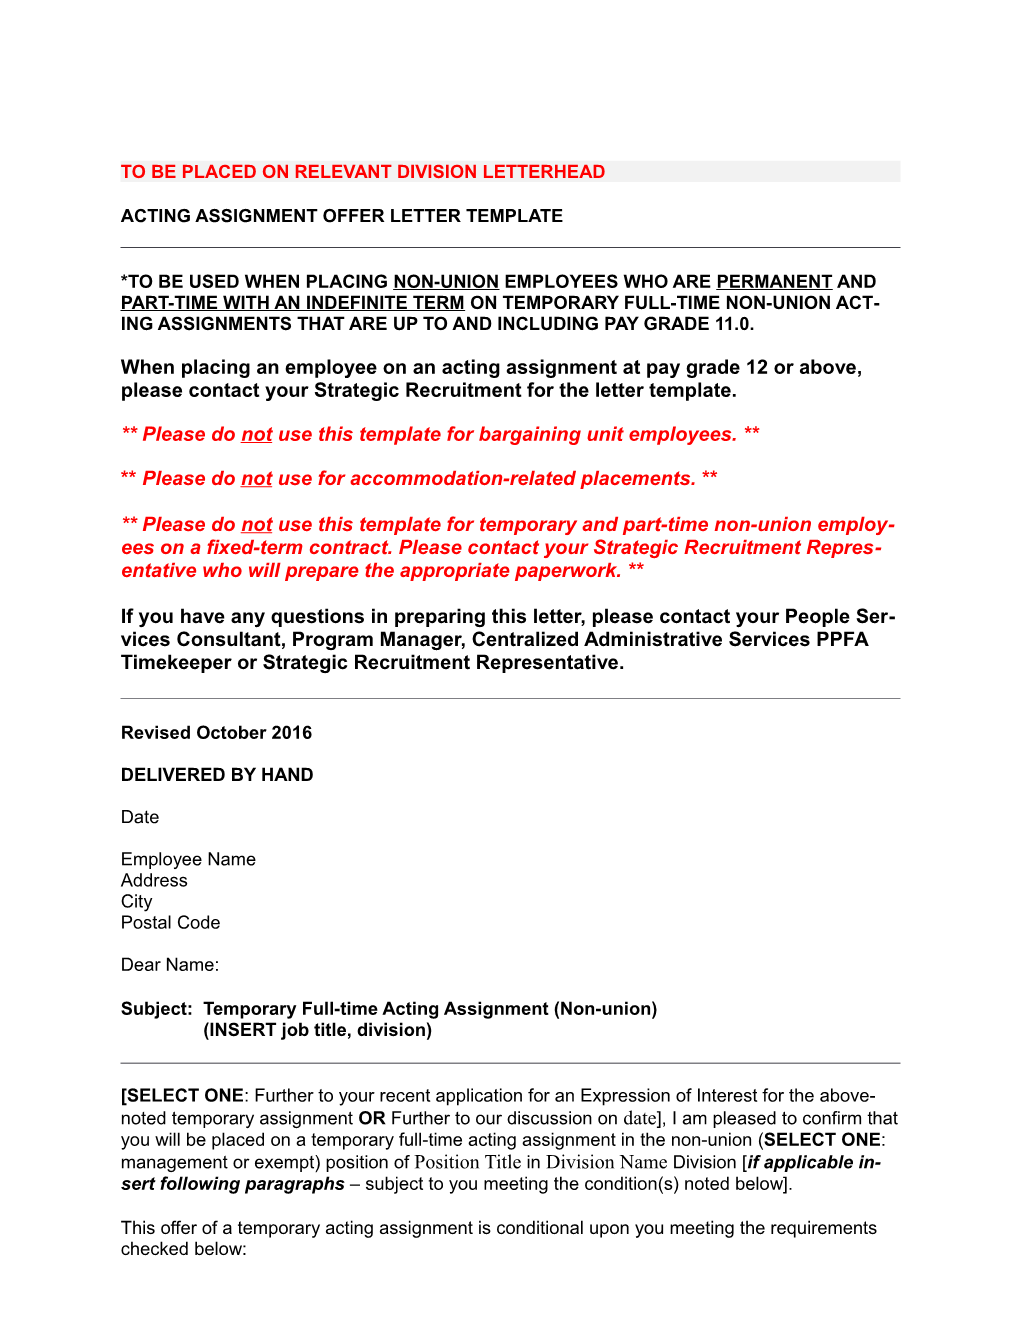 Acting Assignment Offer Letter Template